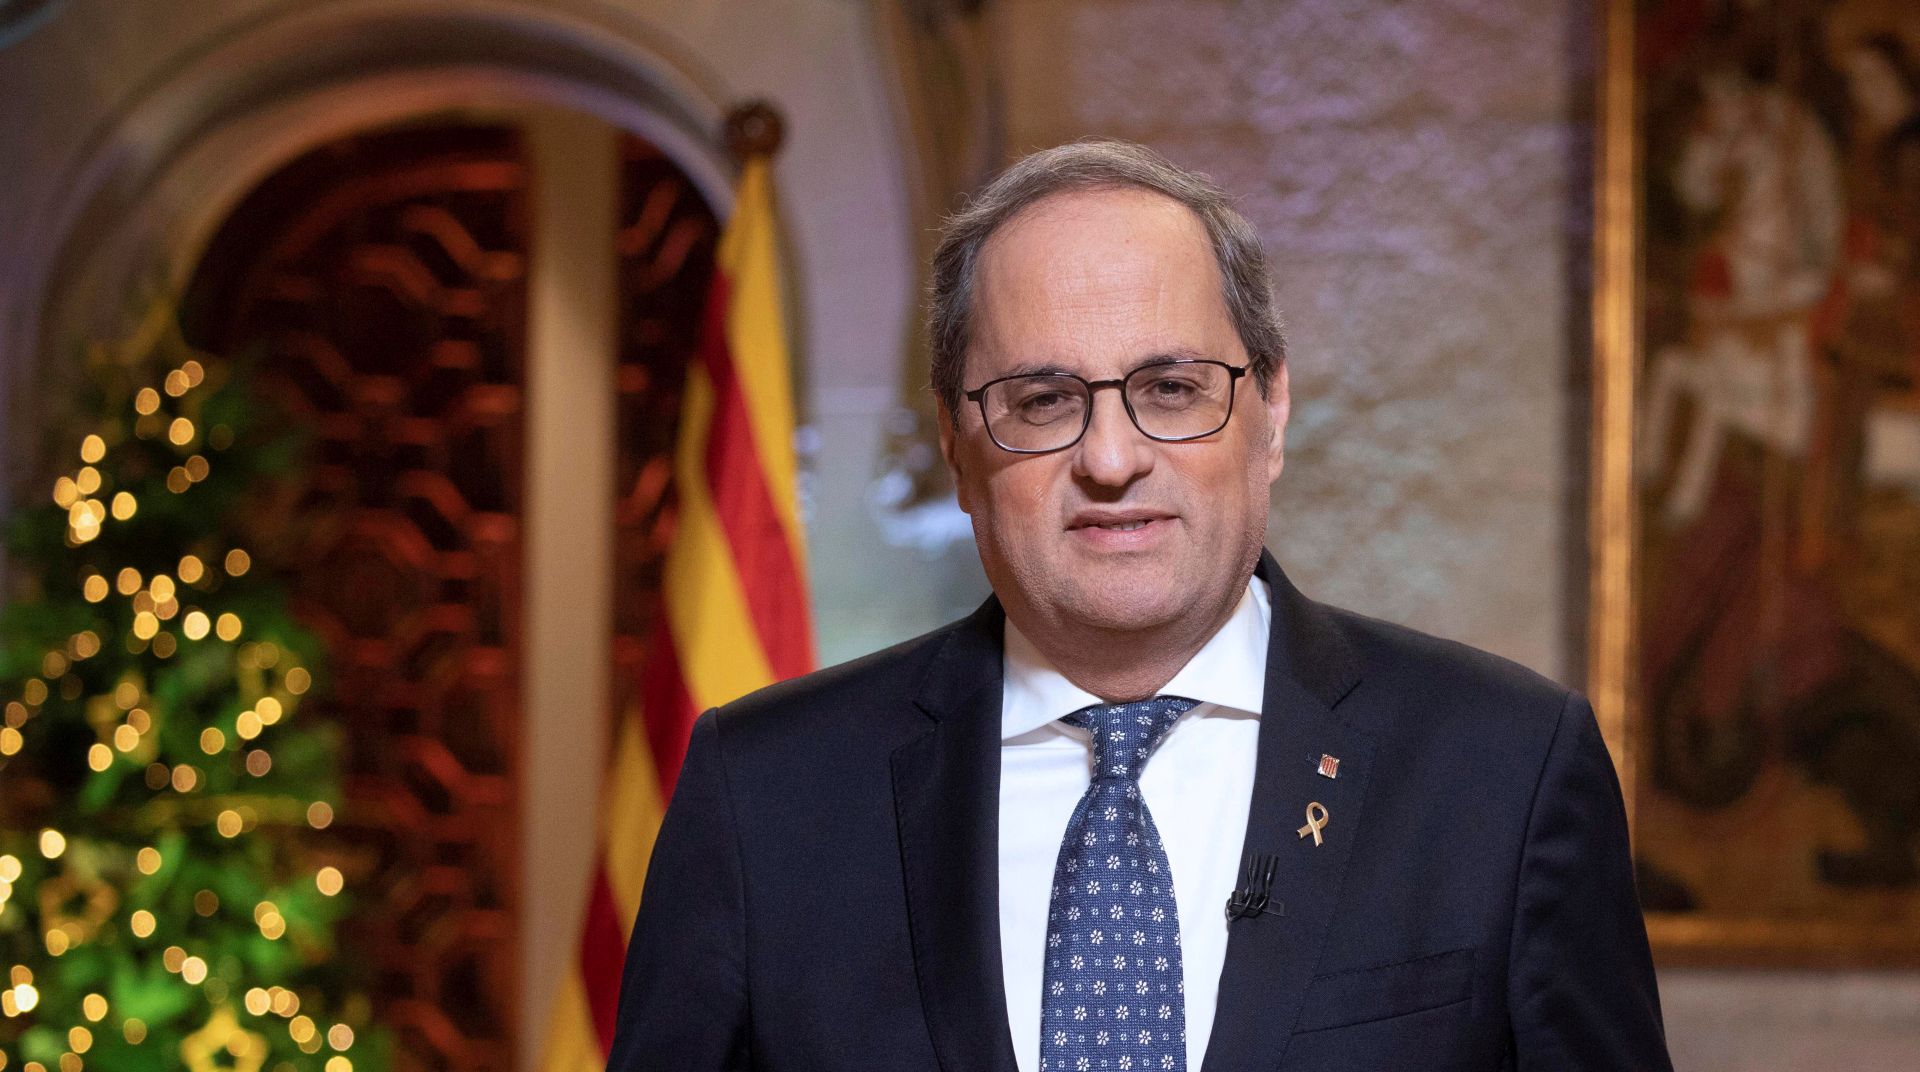 epa08095285 A handout photo made available by the Catalan Regional Government shows Catalan regional President Quim Torra during his traditional New Year's speech in Barcelona, Catalonia, Spain, 30 December 2019.  EPA/Ruben Moreno HANDOUT  HANDOUT EDITORIAL USE ONLY/NO SALES